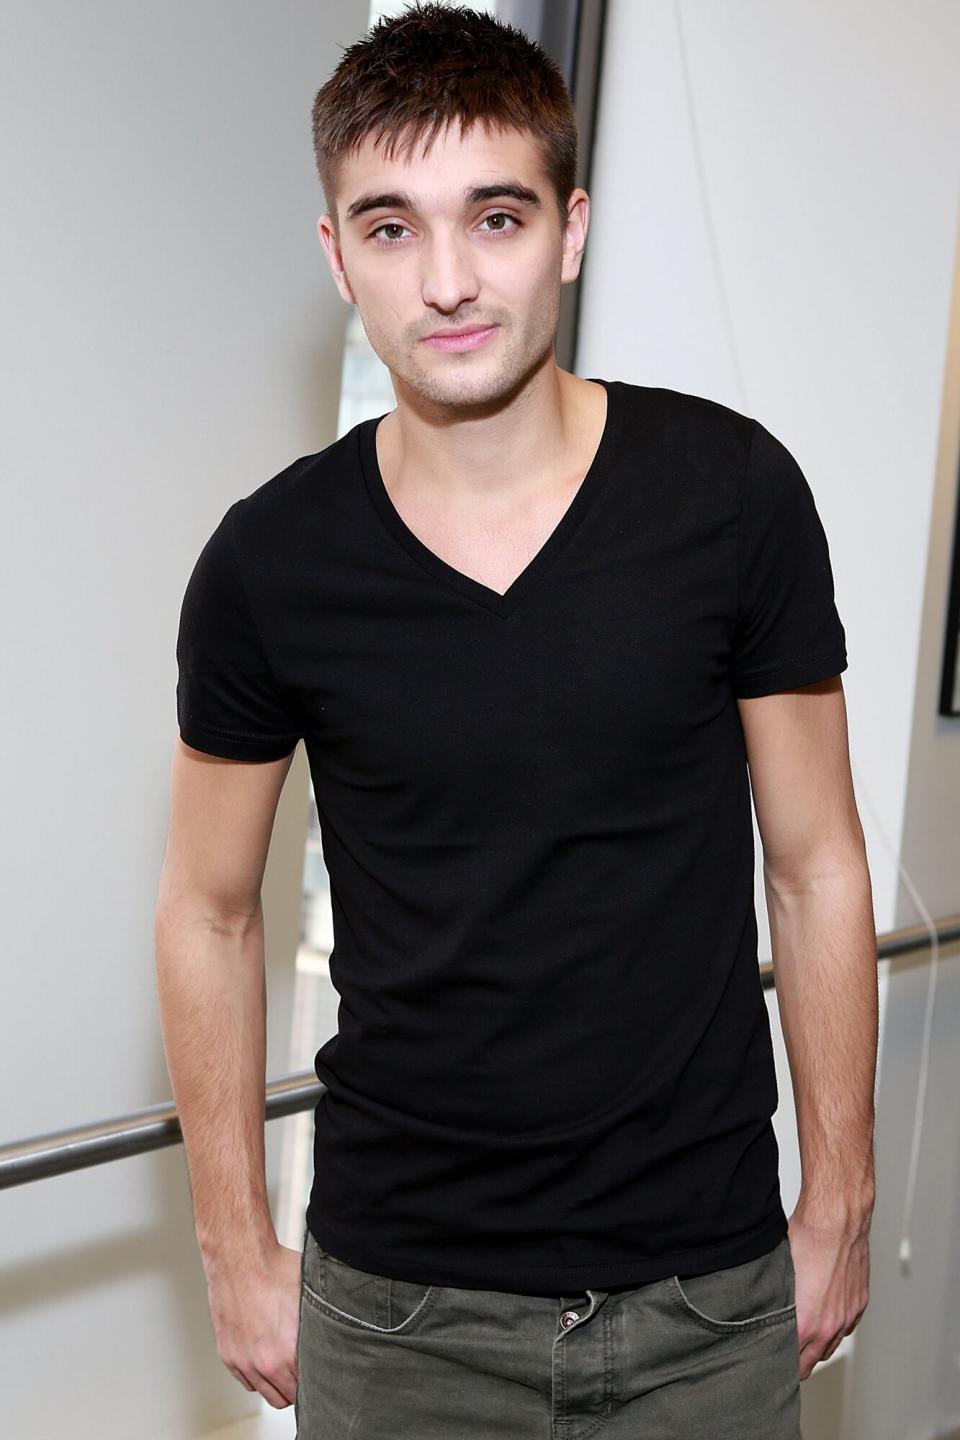 Tom Parker of the band The Wanted visits at SiriusXM Studios on May 31, 2013 in New York City.